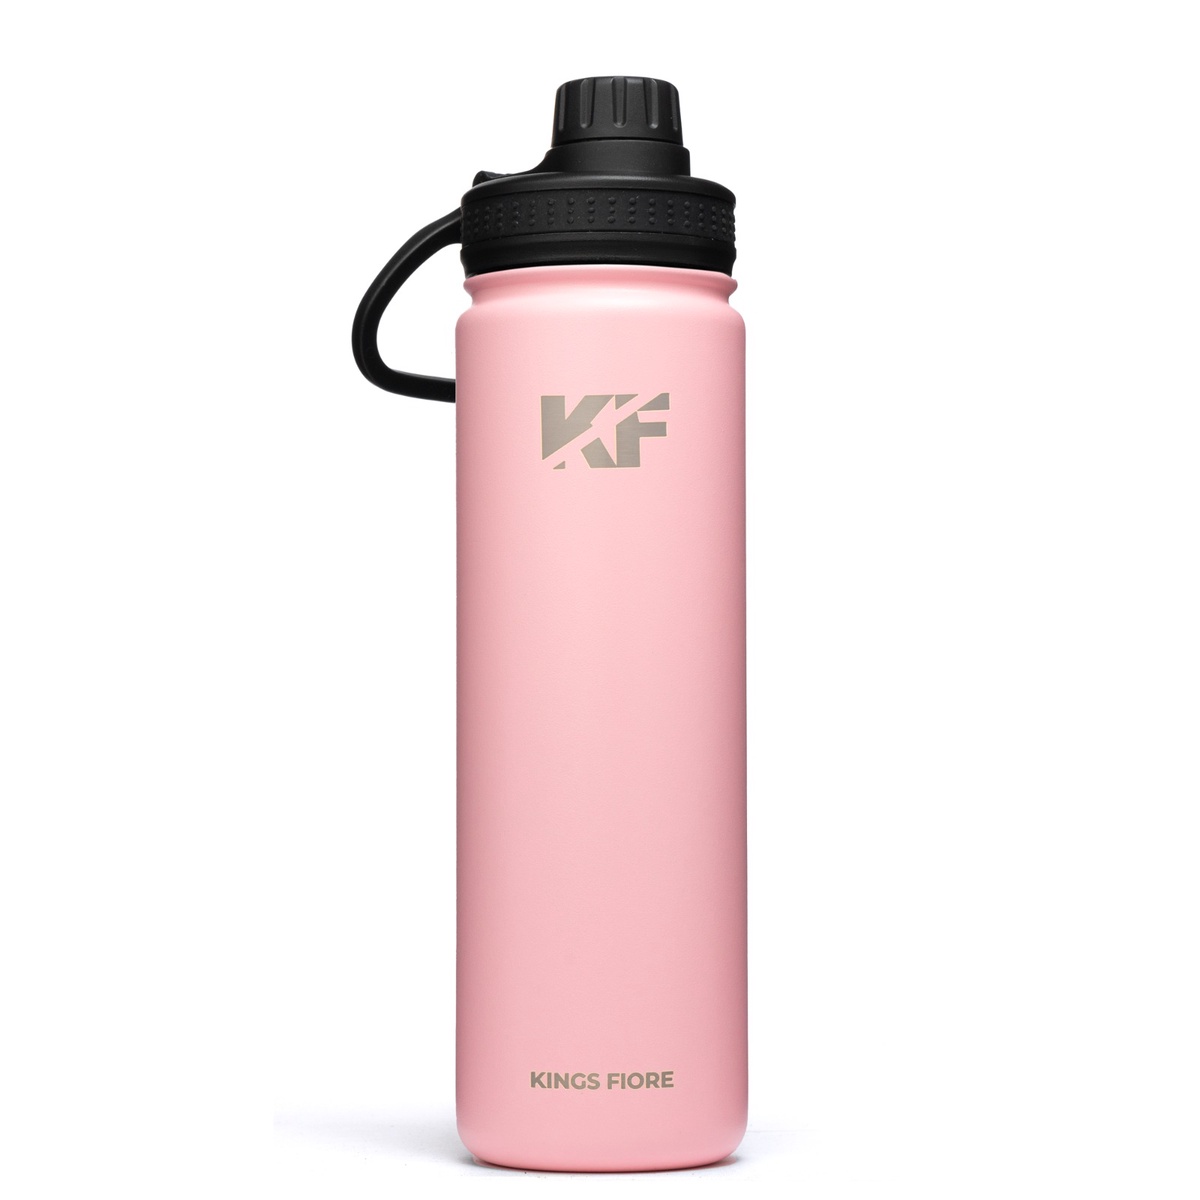 Ten great advantages of using a stainless steel bottle